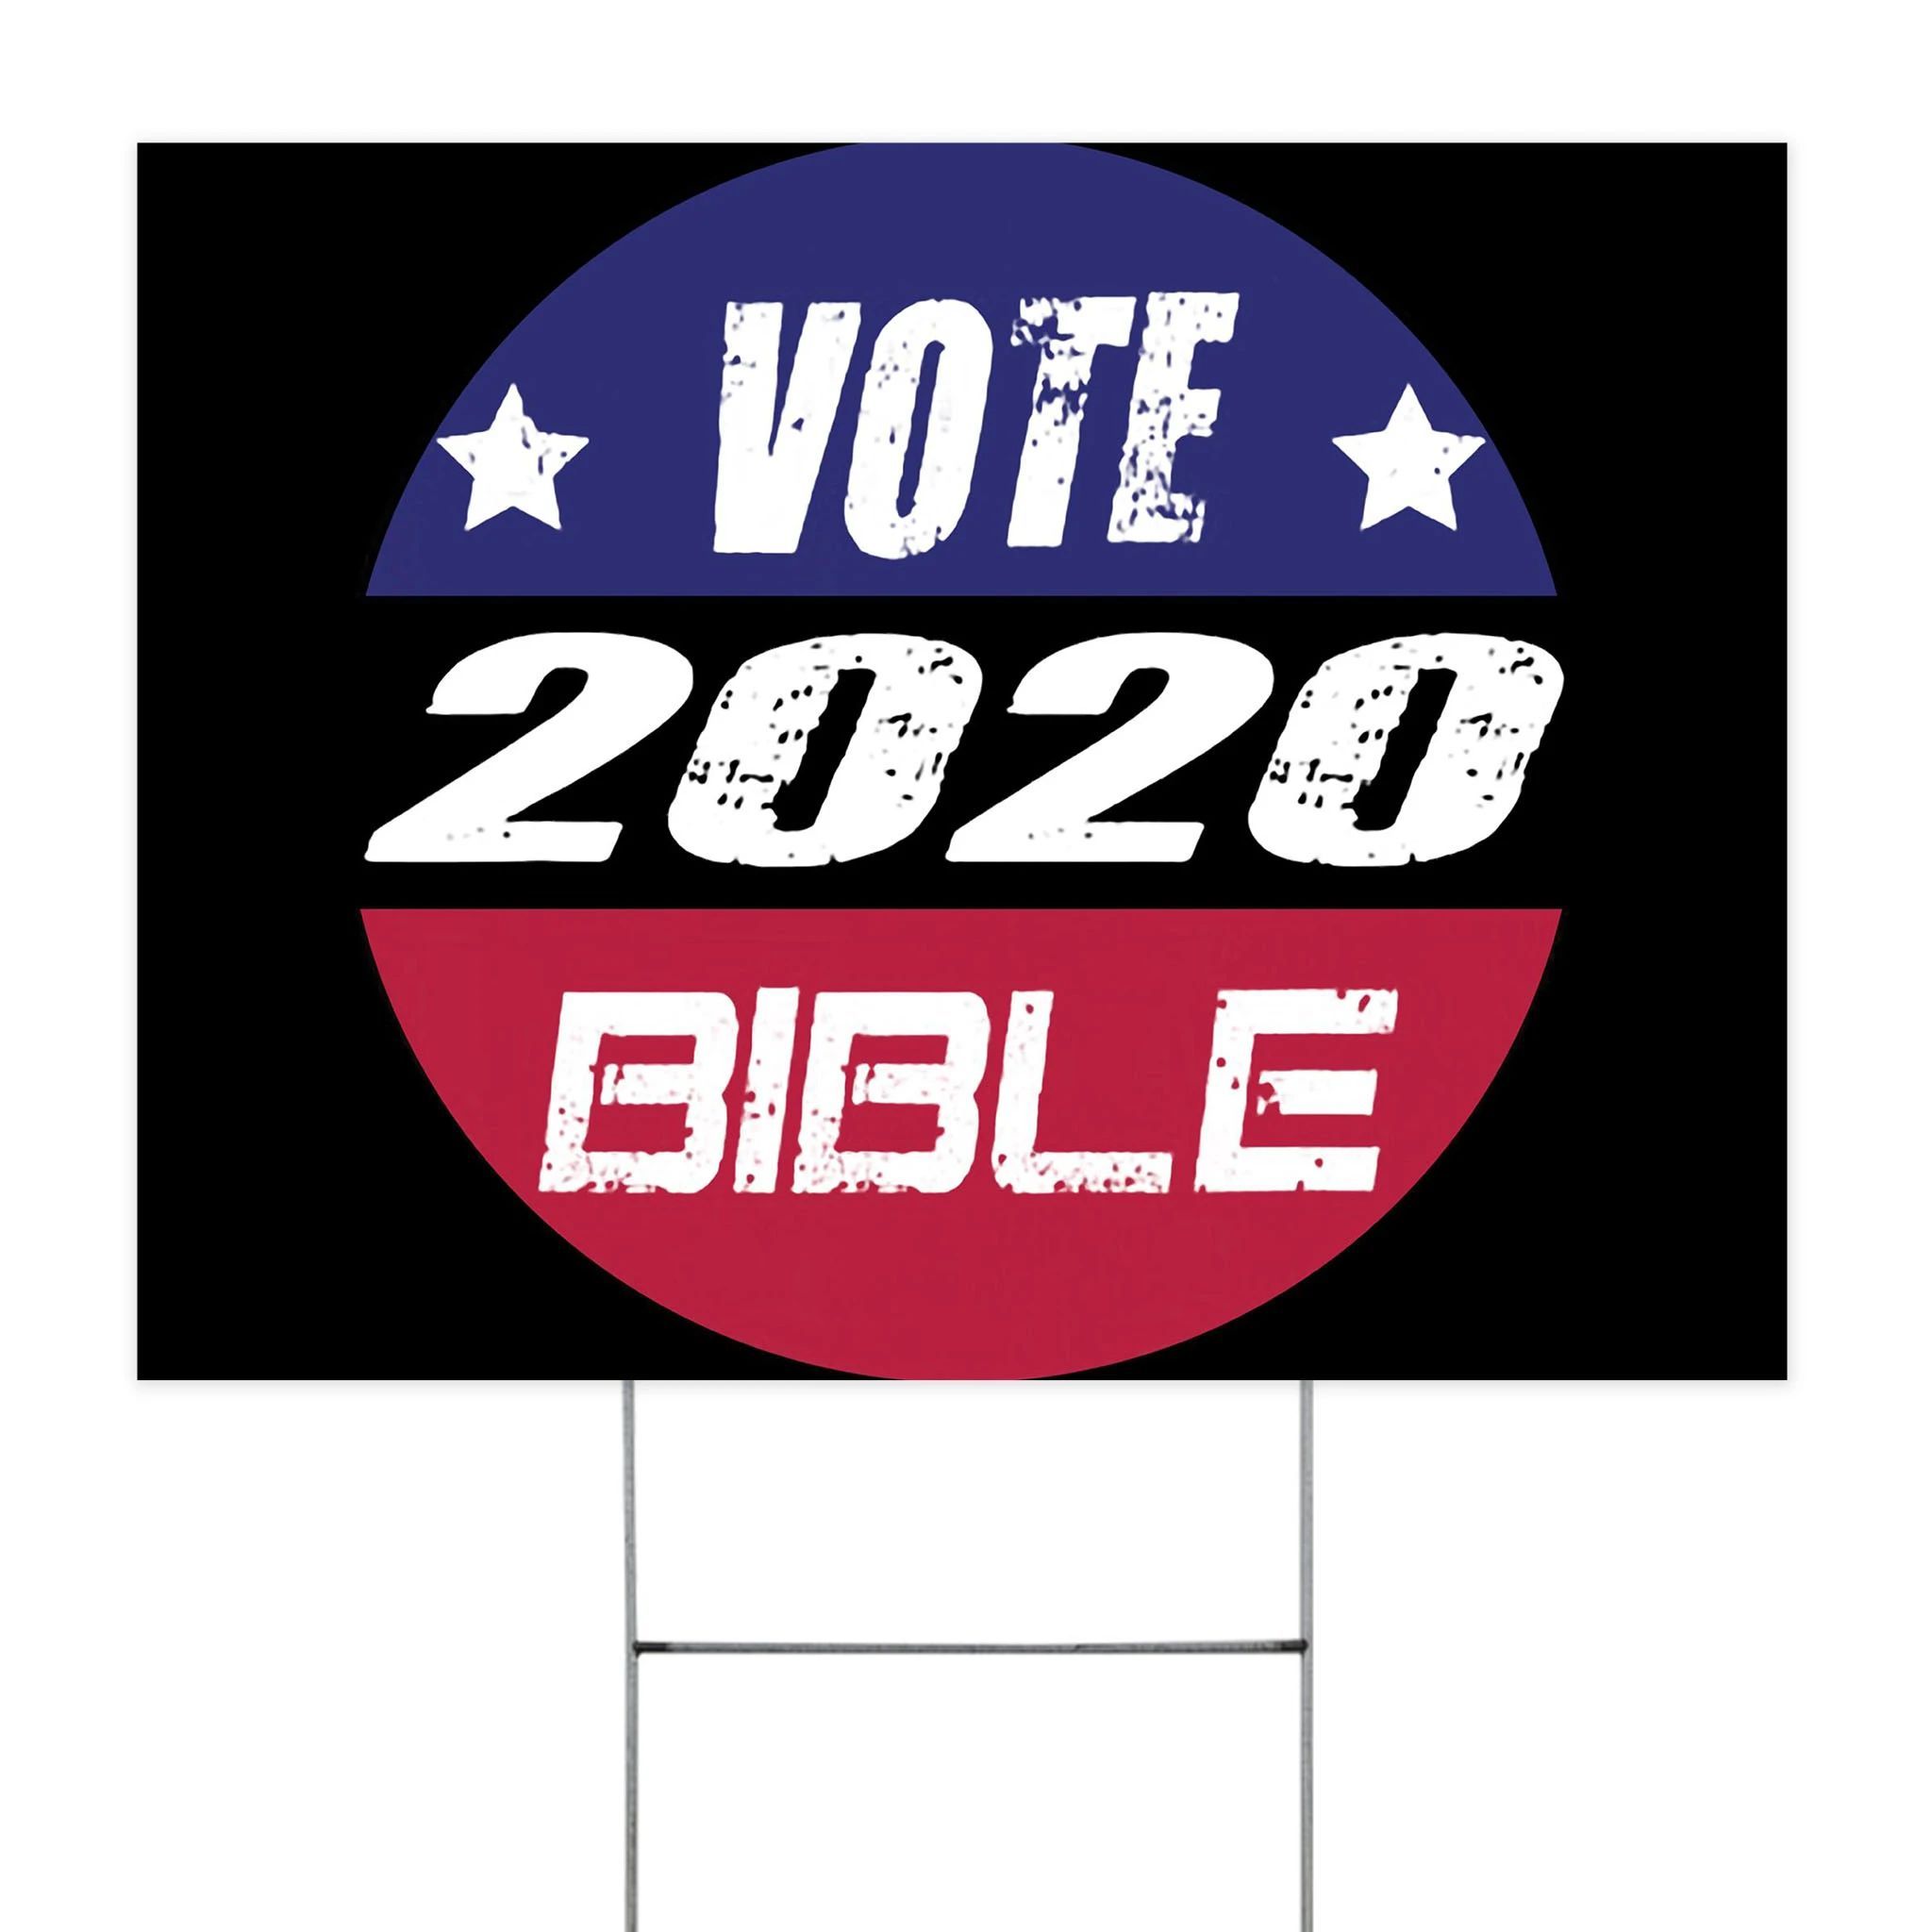 Vote The Bible 2020 Yard Sign Vote Pro life Bible Verses Christian Lawn Sign House Decor